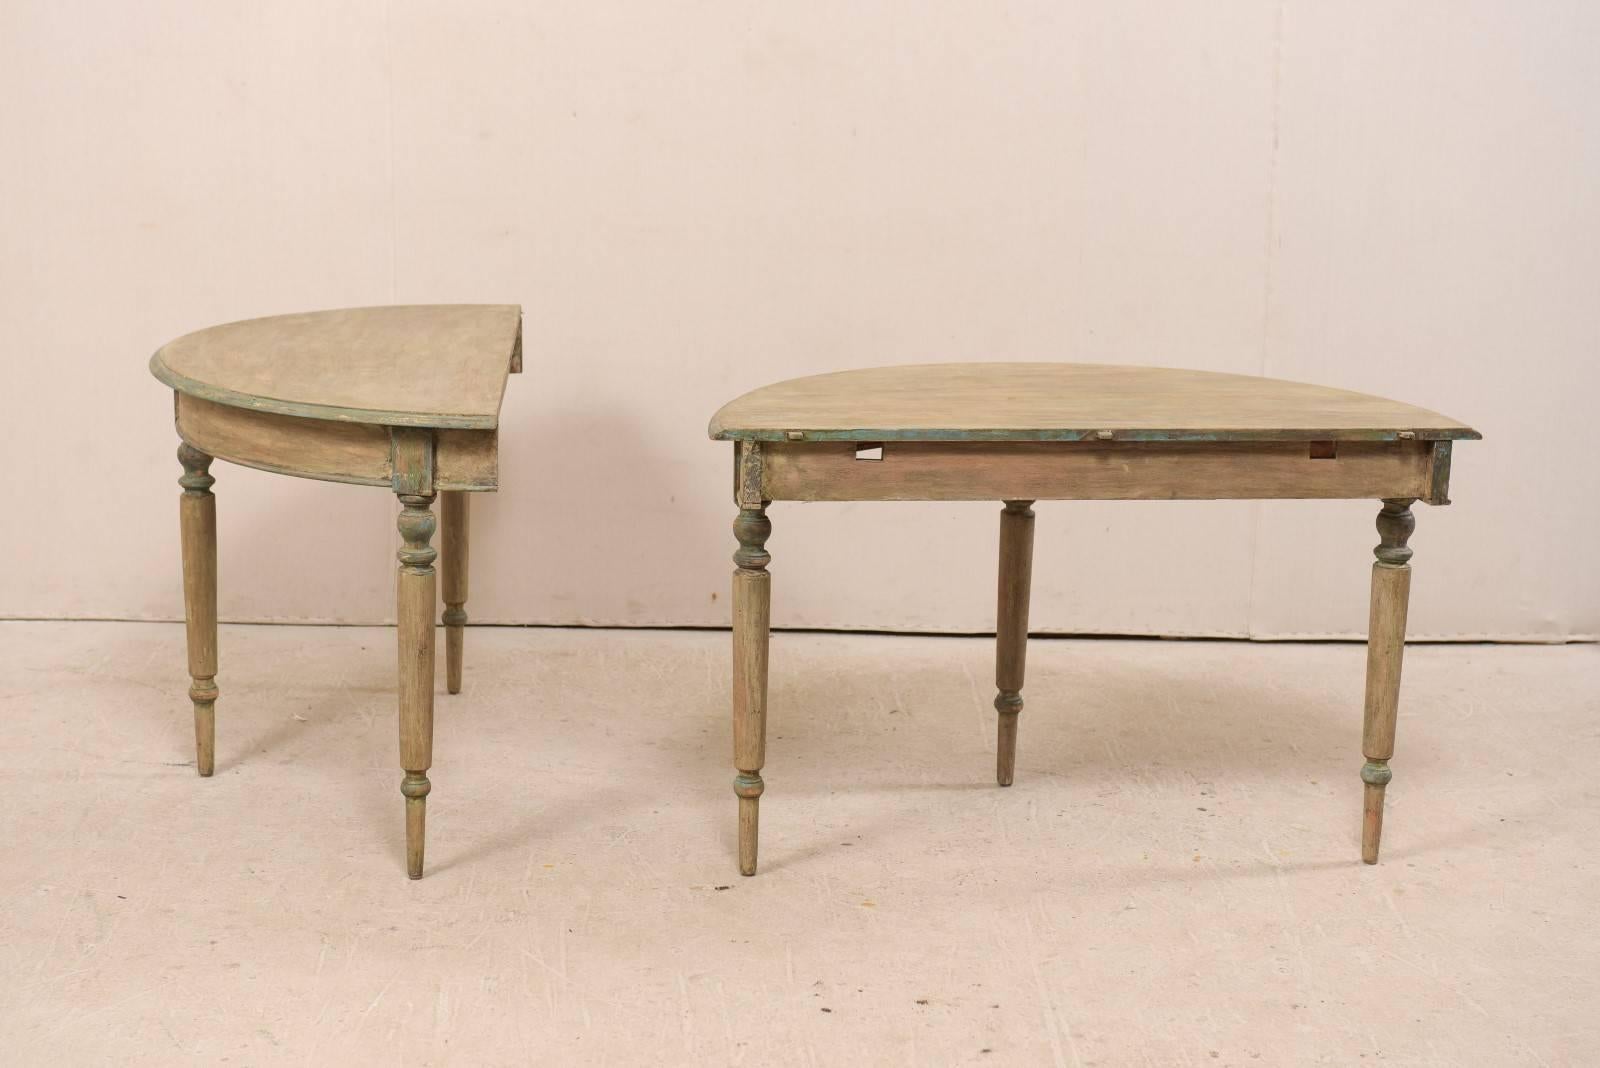 Pair of 19th Century Swedish Painted Wood Demi-Lune Tables with Turned Legs 3